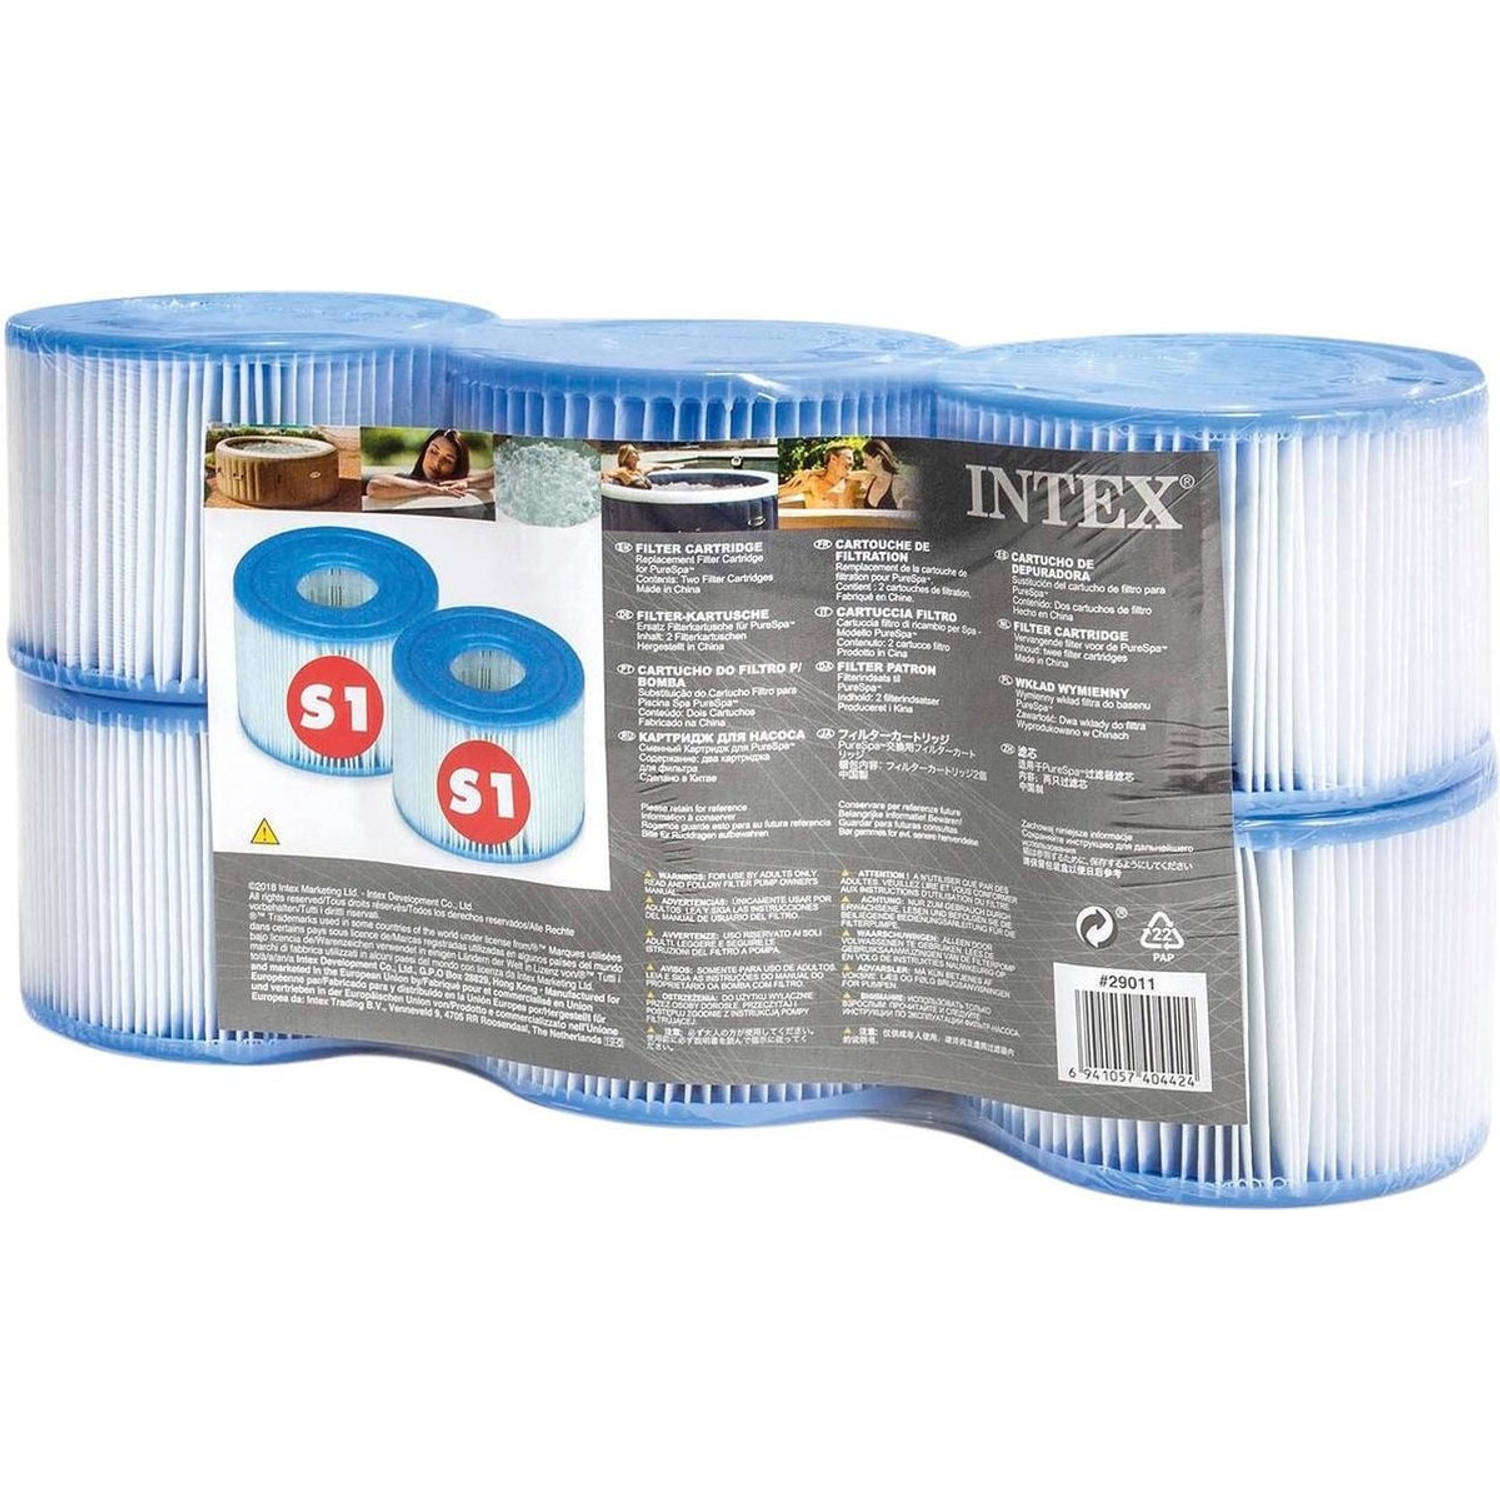 24 S-1 Intex Pure Spa Filter opblaas bubbelbad jacuzzi